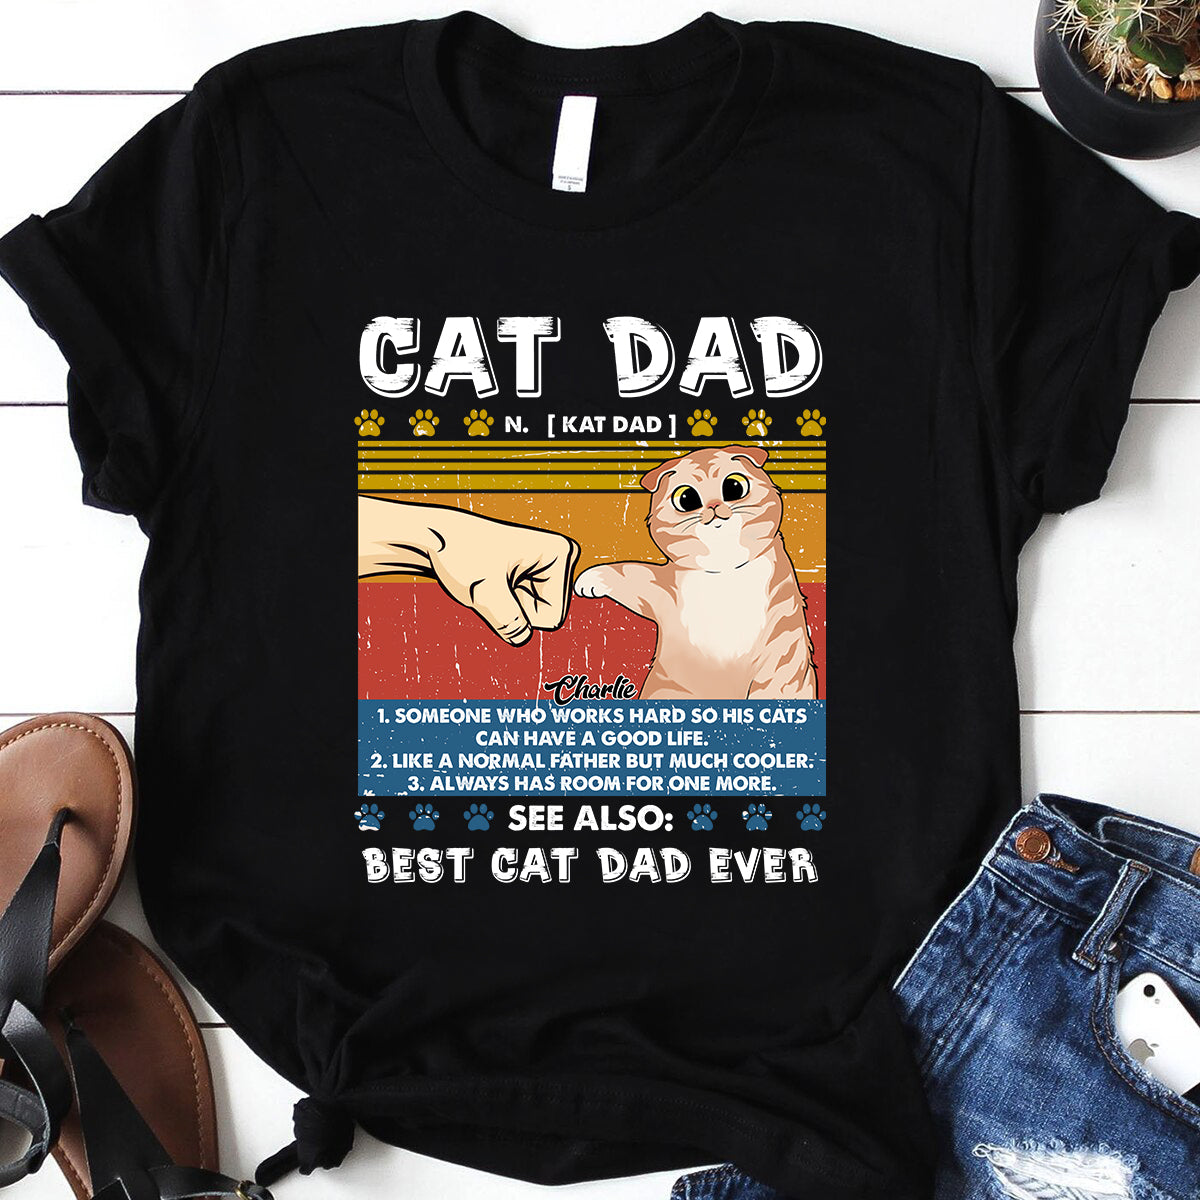 Personalized Cat Dad Someone Who Works Hard So His Cats Can Have A Good Life T-Shirt